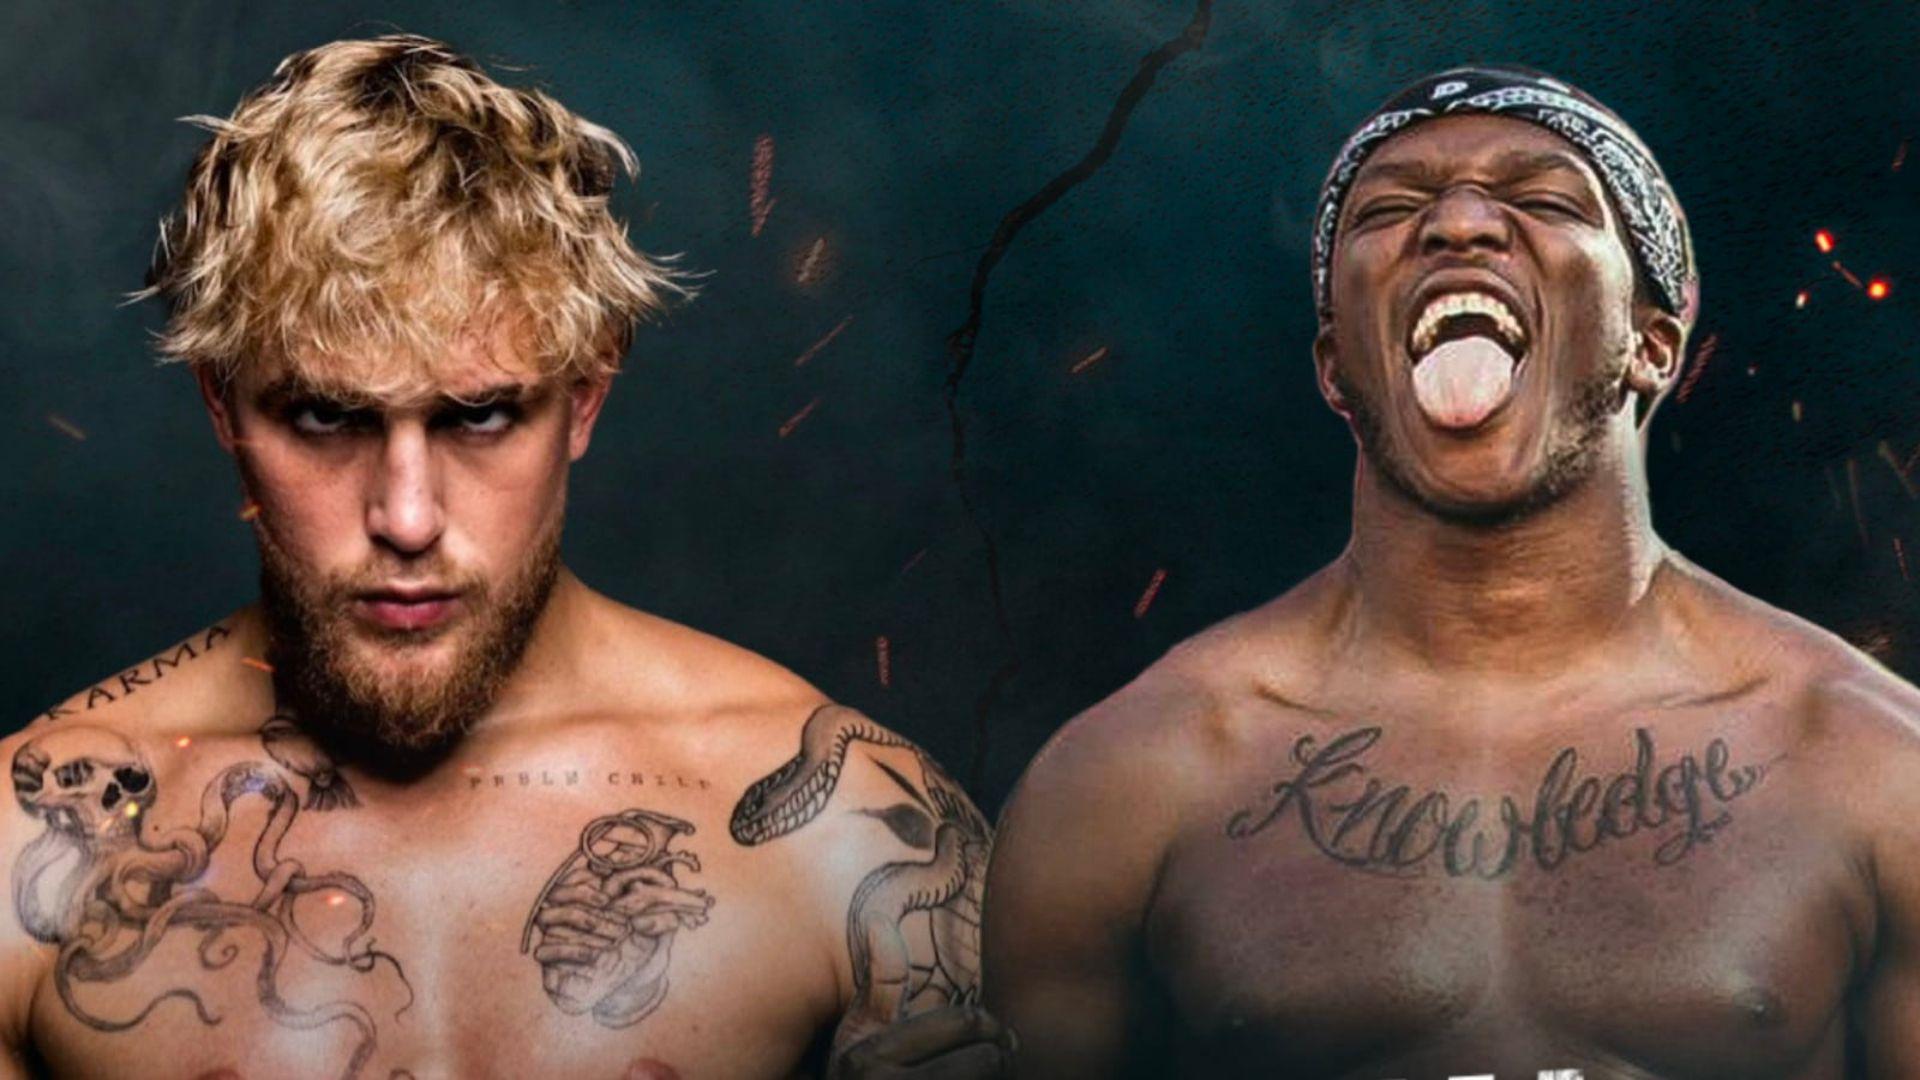 KSI and Jake Paul in boxing gear side by side